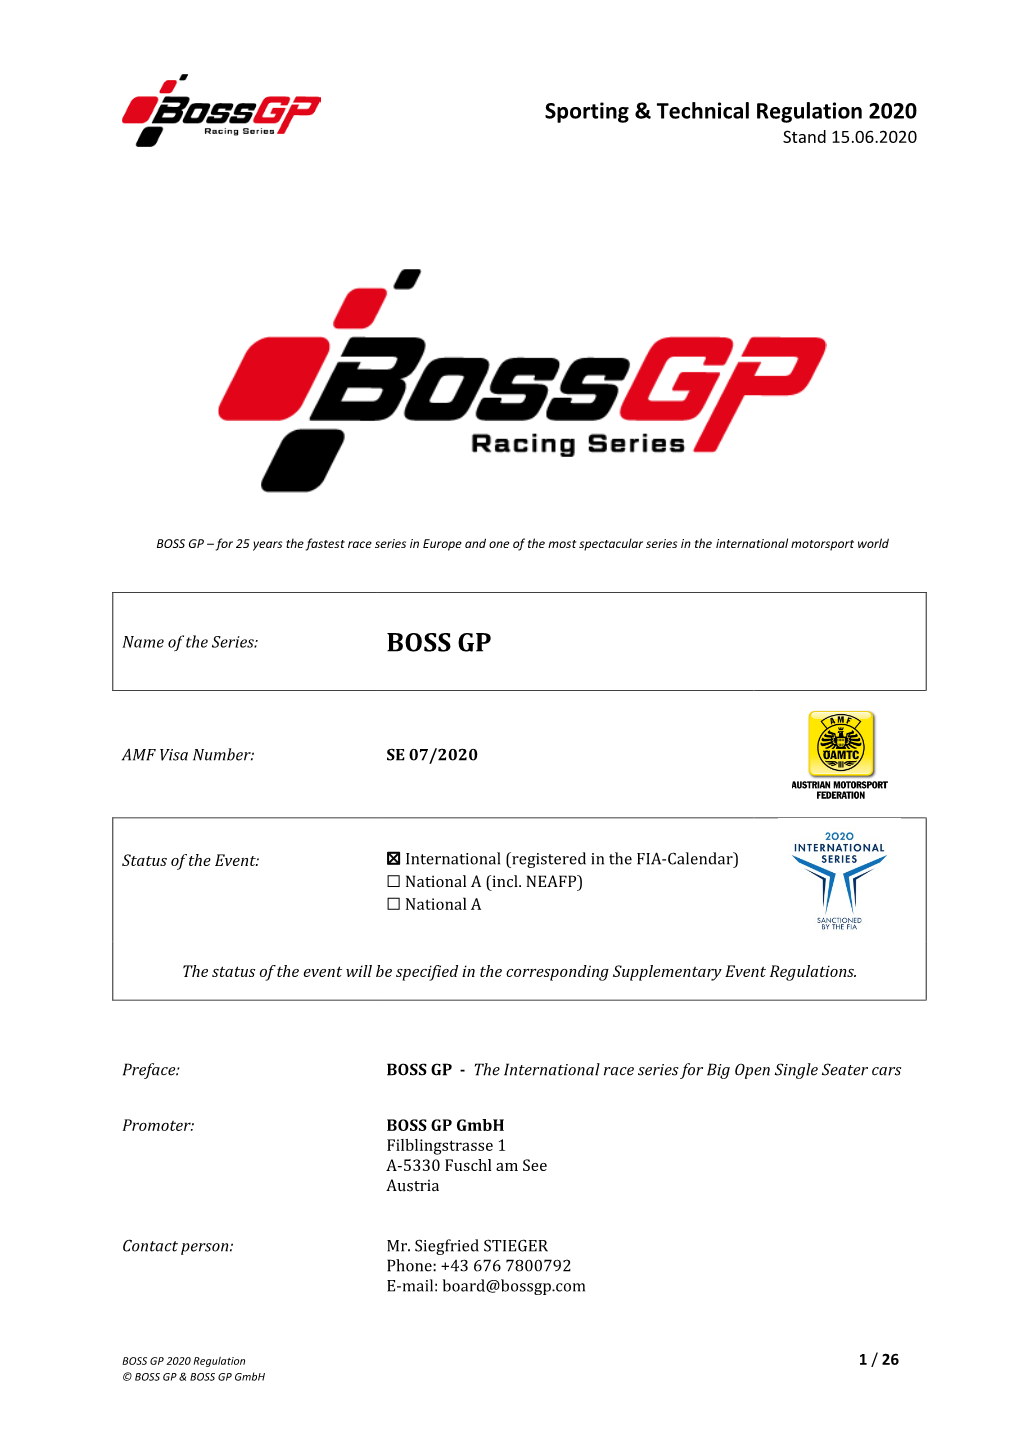 BOSS GP – for 25 Years the Fastest Race Series in Europe and One of the Most Spectacular Series in the International Motorsport World